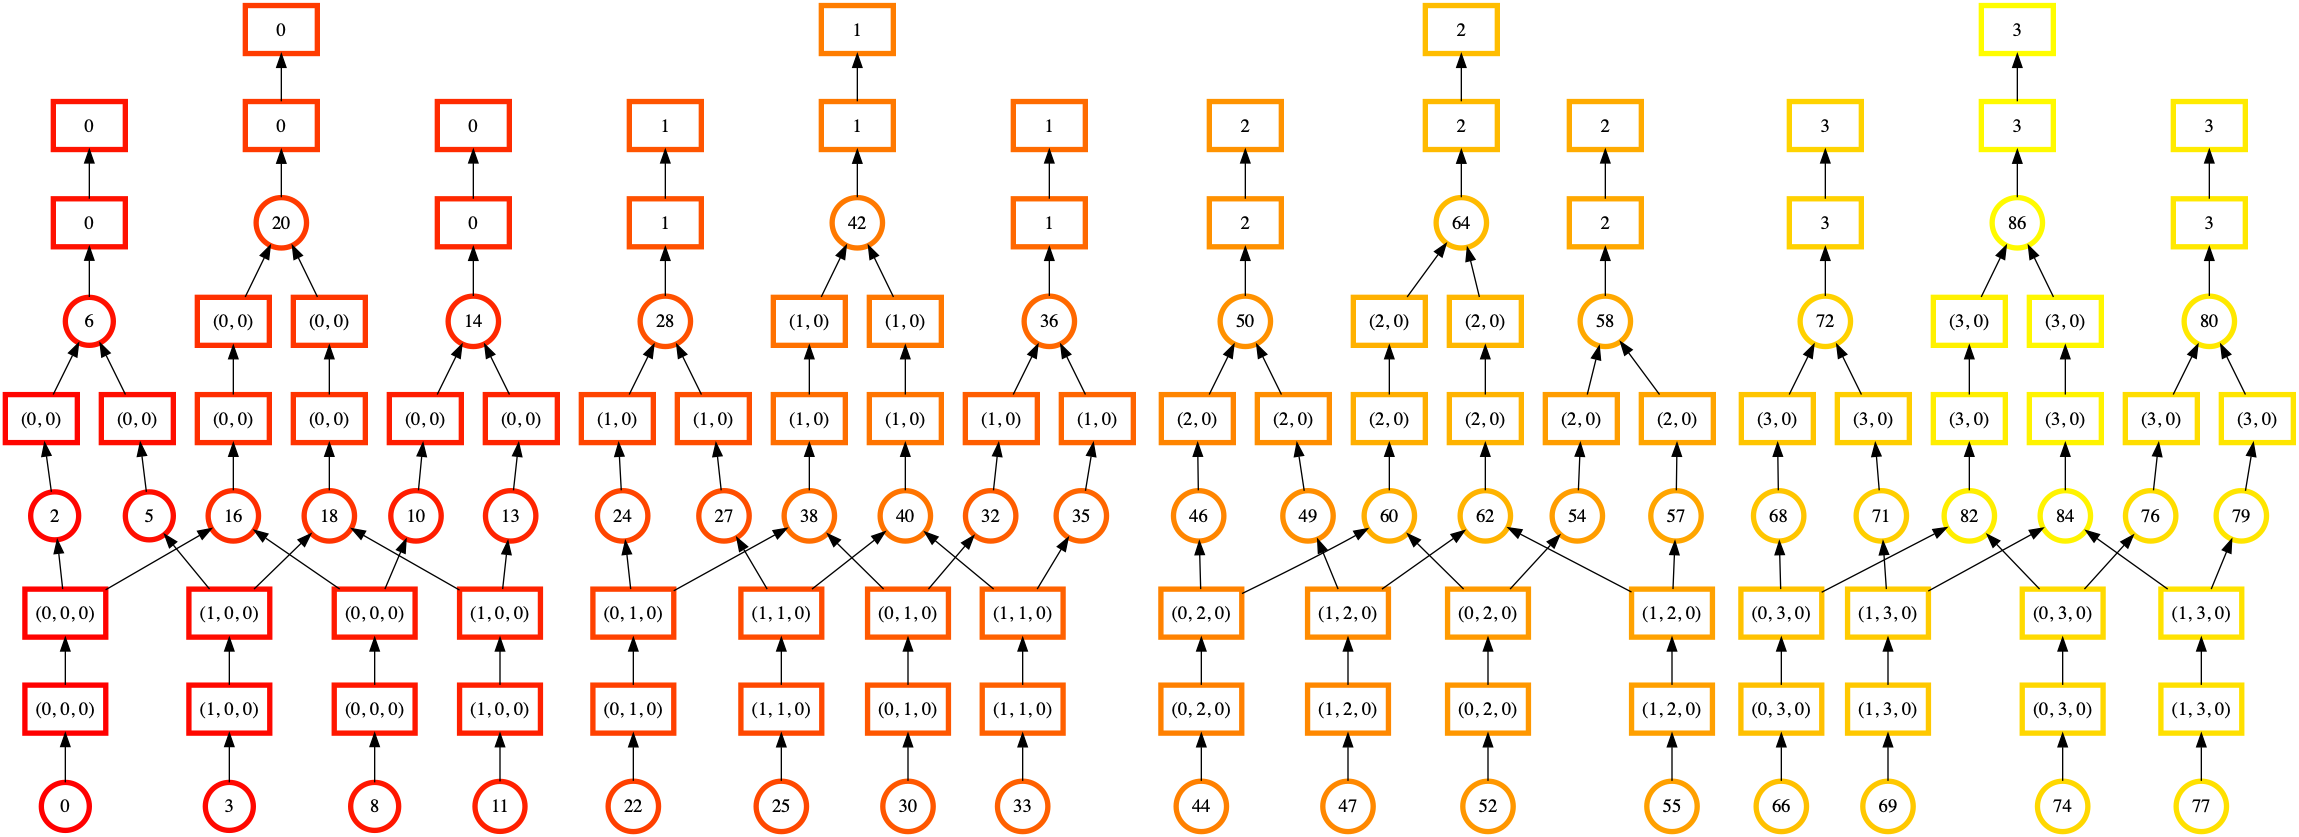 Complex task graph of several vertical node chains at the output, and a similar number of input blocks. The outputs and inputs are linked by simple nodes of a few inputs each, laid out without significant crossover between sections of the tree. The color coding of the output chains shows clear progression in the order of execution with each output color having a corresponding input of the same color.